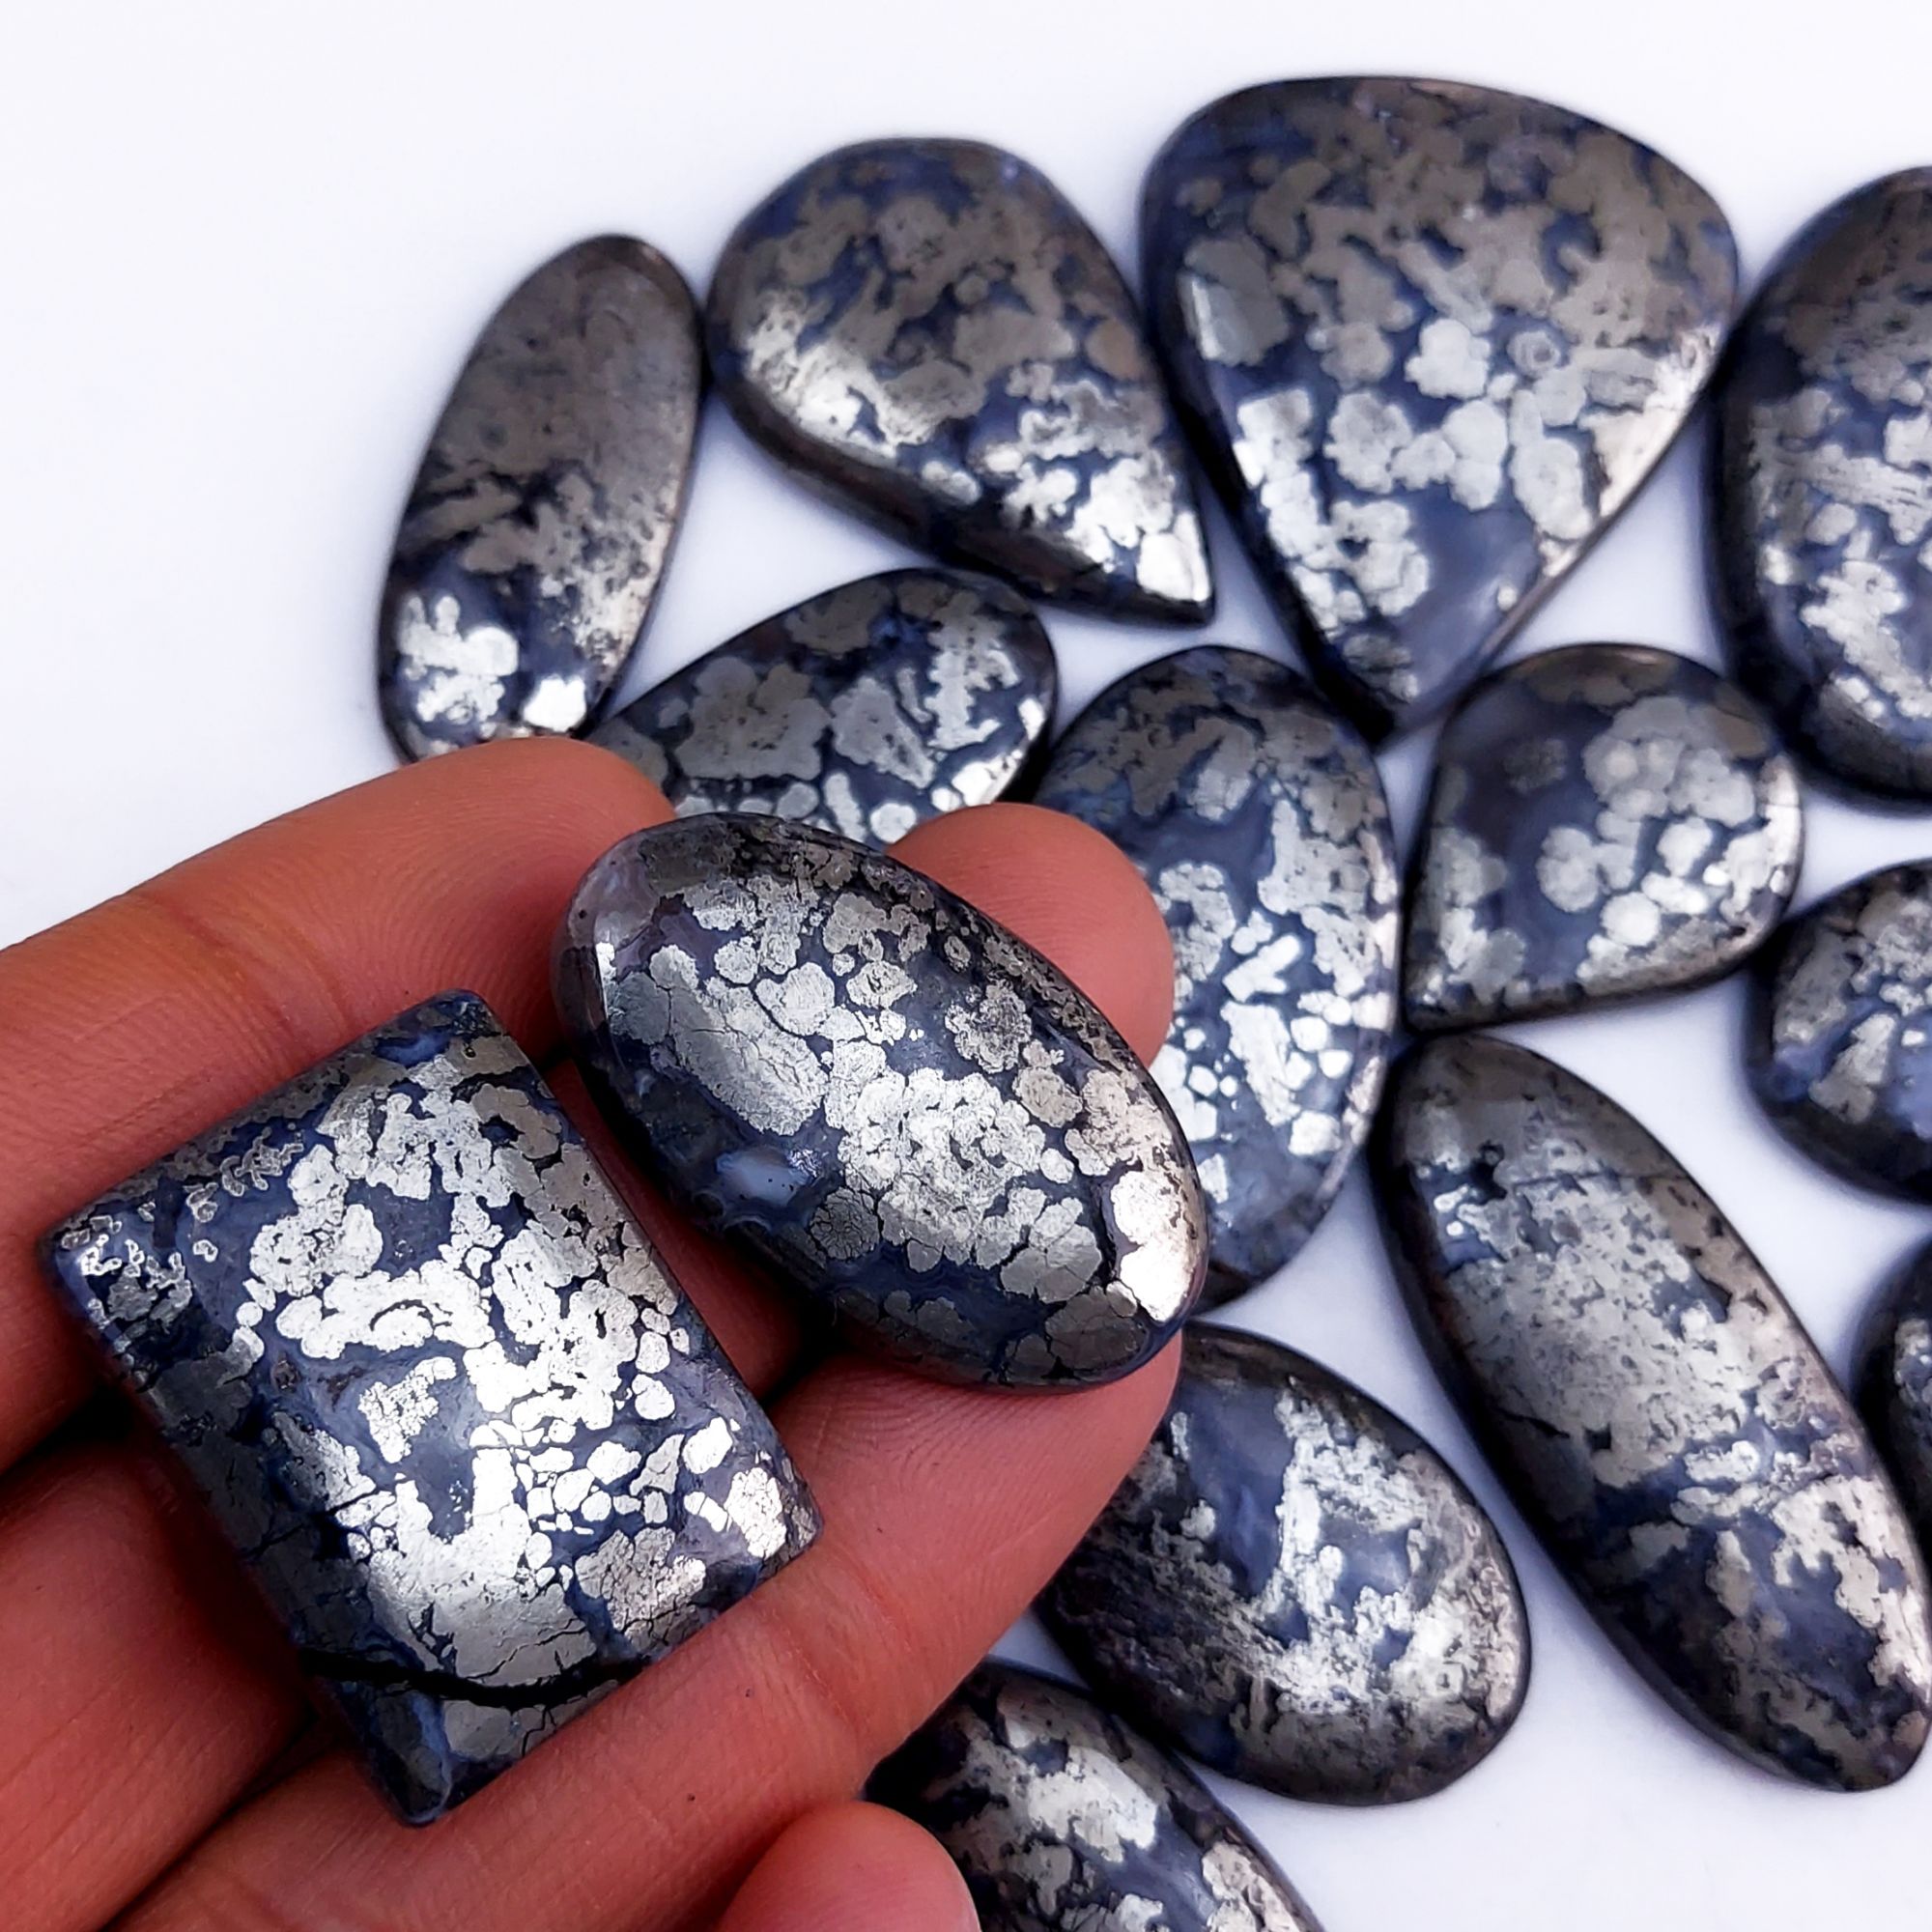 16Pcs 761Cts Natural Marcasite Grey Cabochon Back Side Unpolished Gemstone Semi-Precious Gemstones For Jewelry Making 40x35 22x22mm #10039